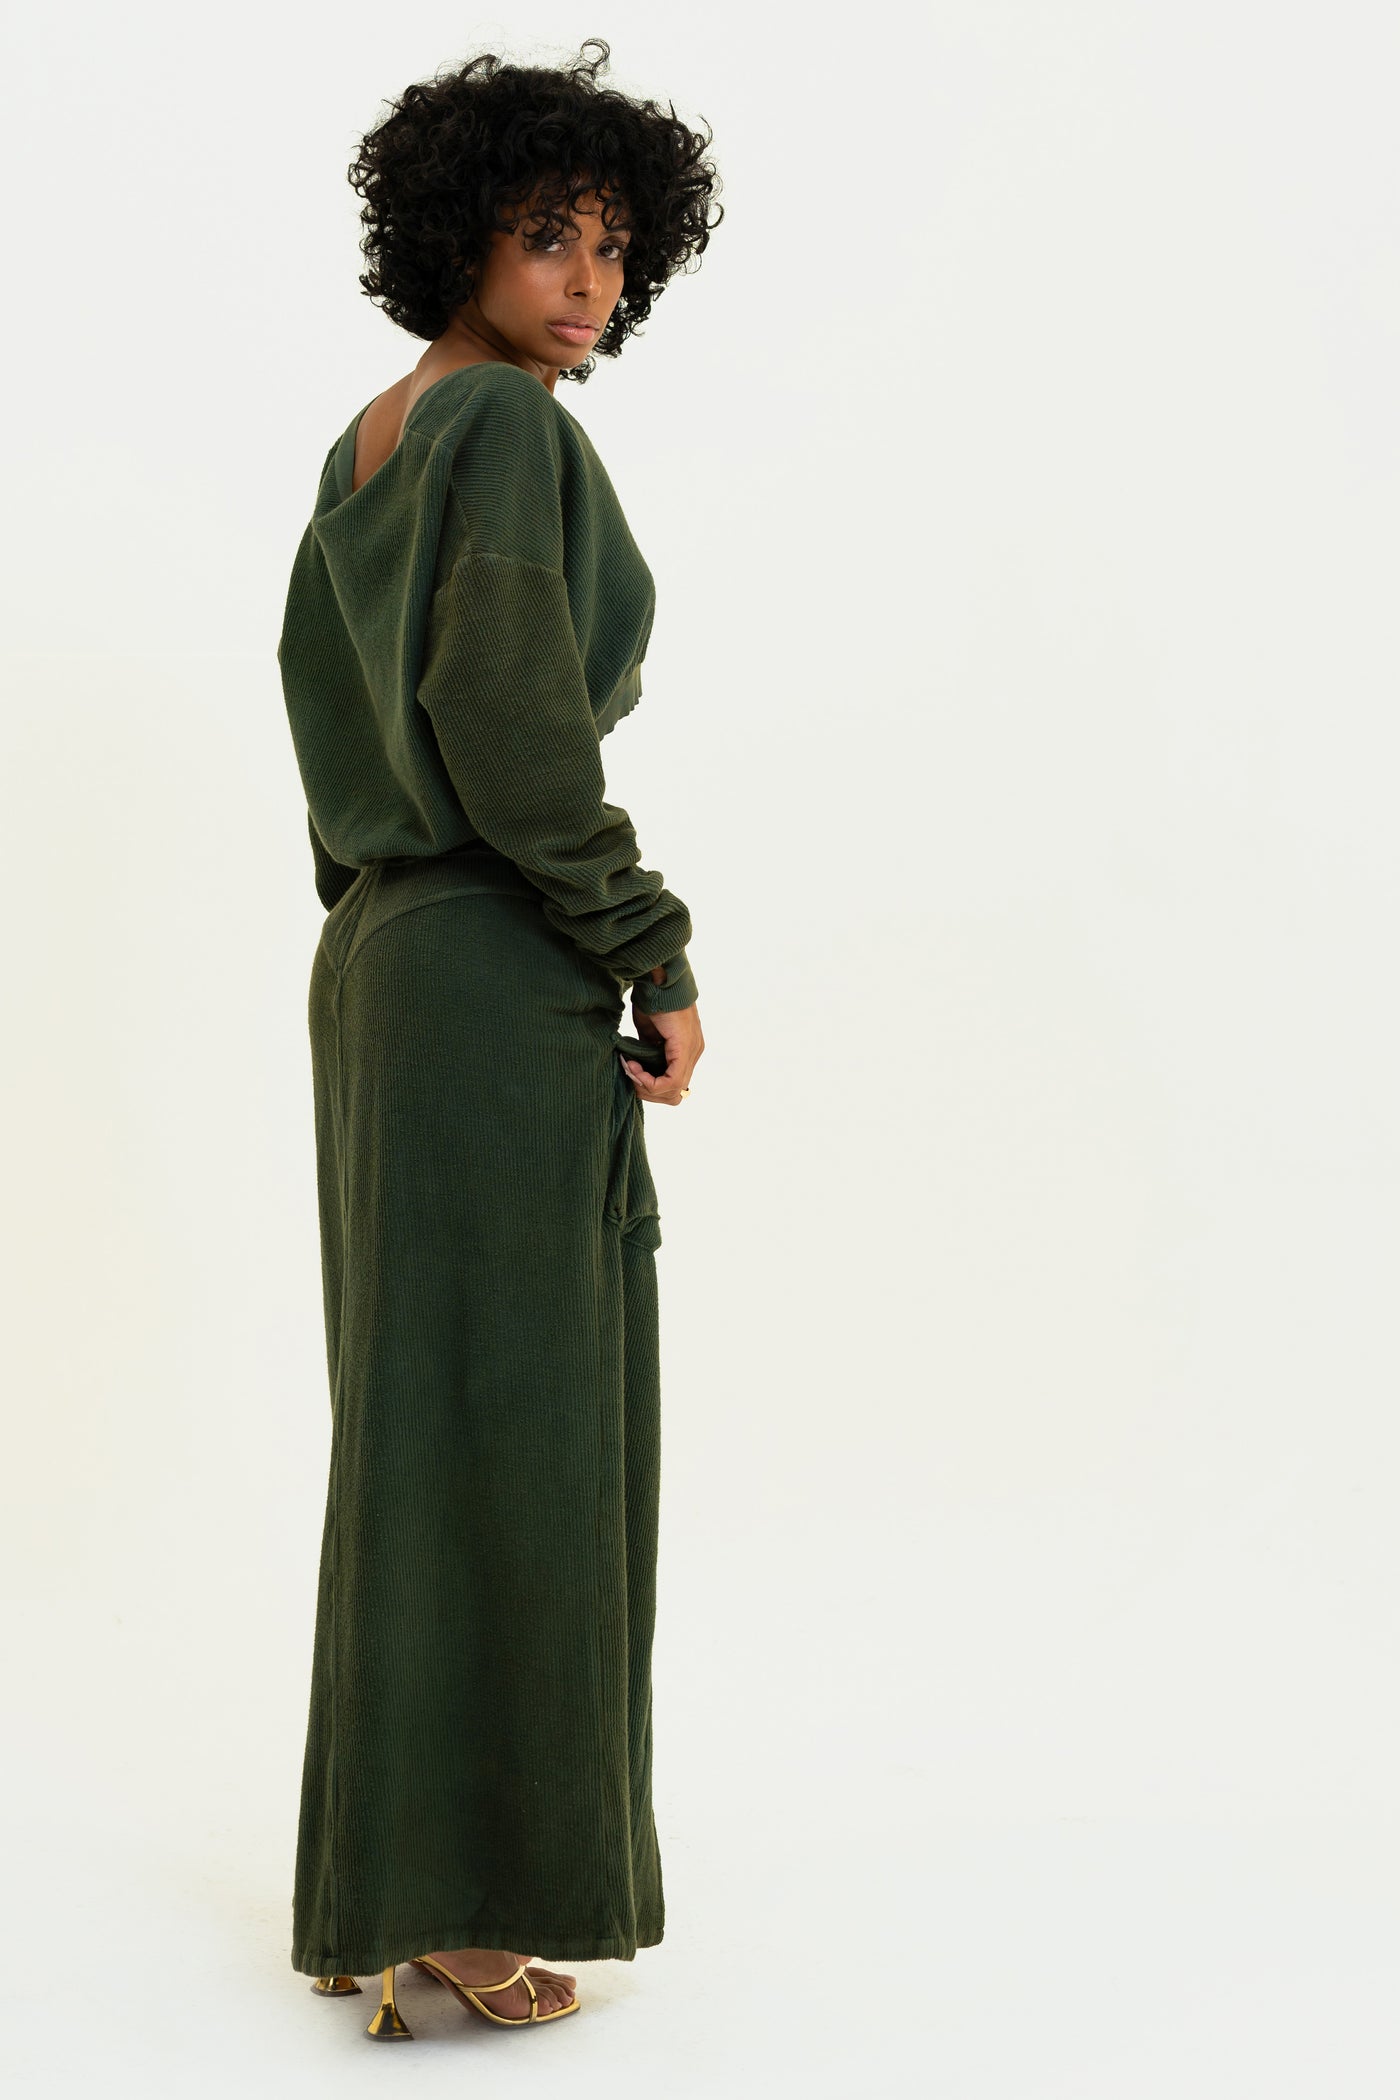 Model showcasing the back of the Aspen set featuring the pullover and pants in the color Olive.